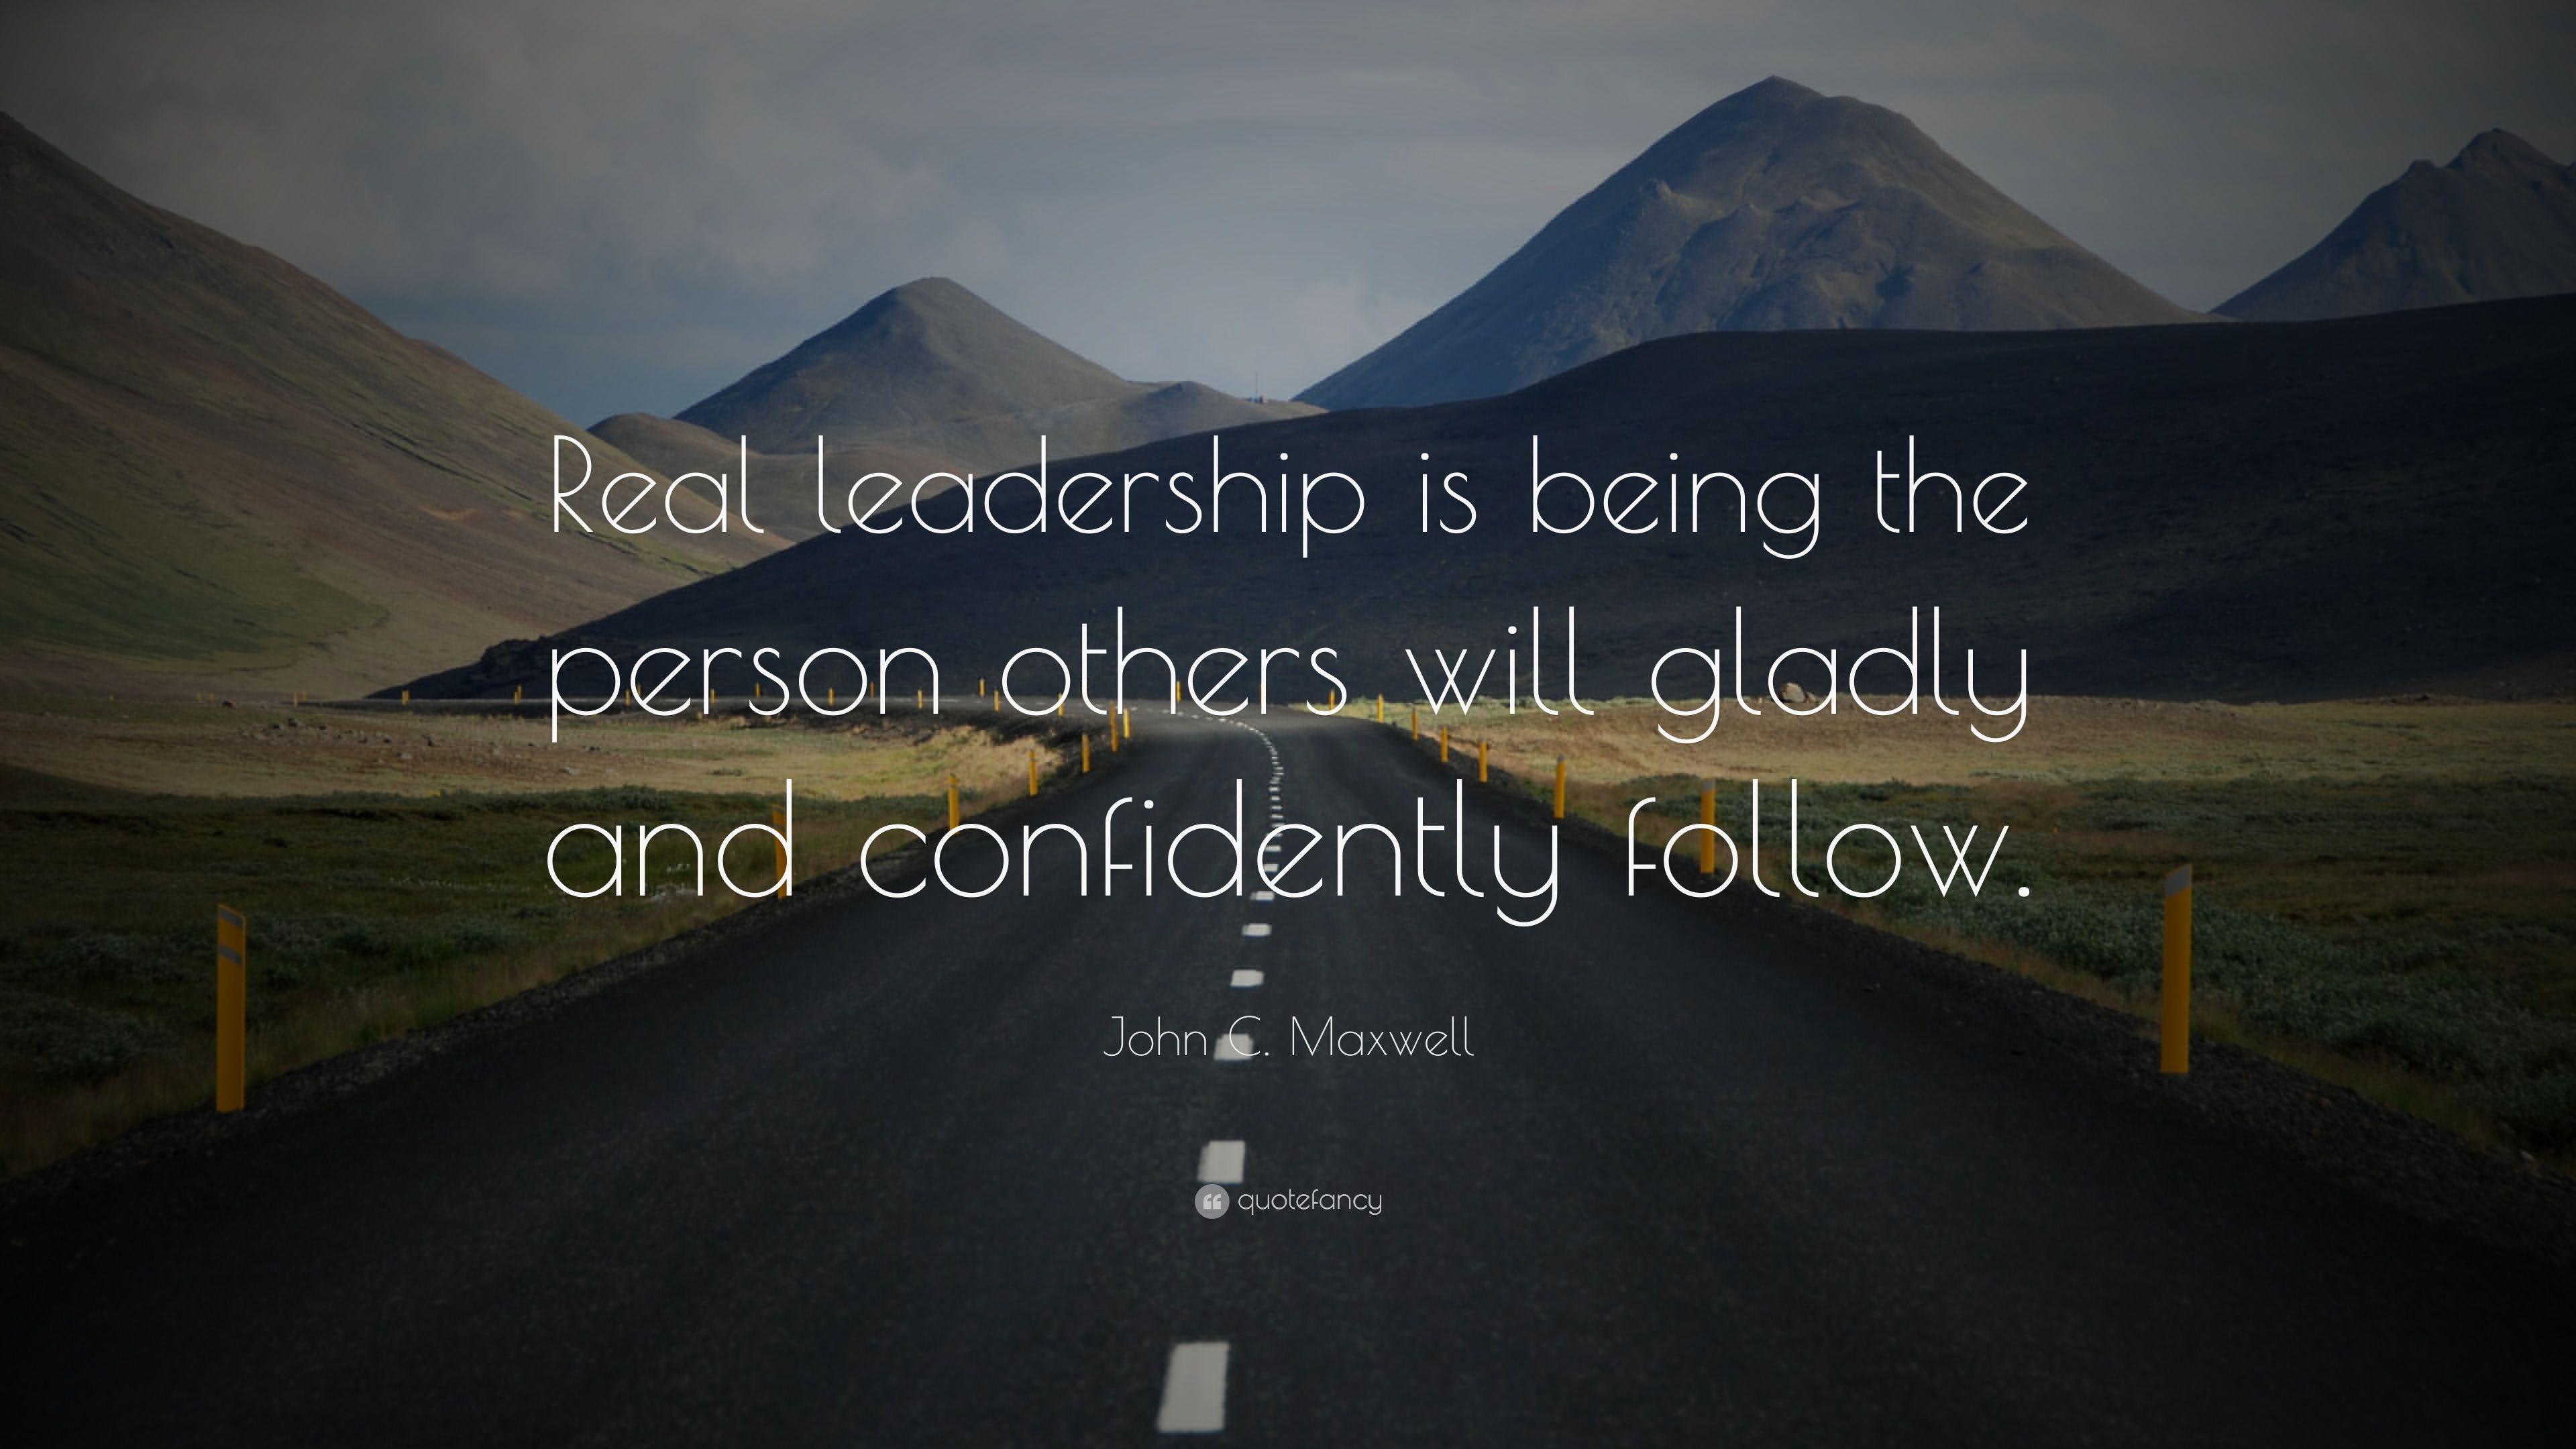 John C. Maxwell Quote: “Real leadership is being the person others